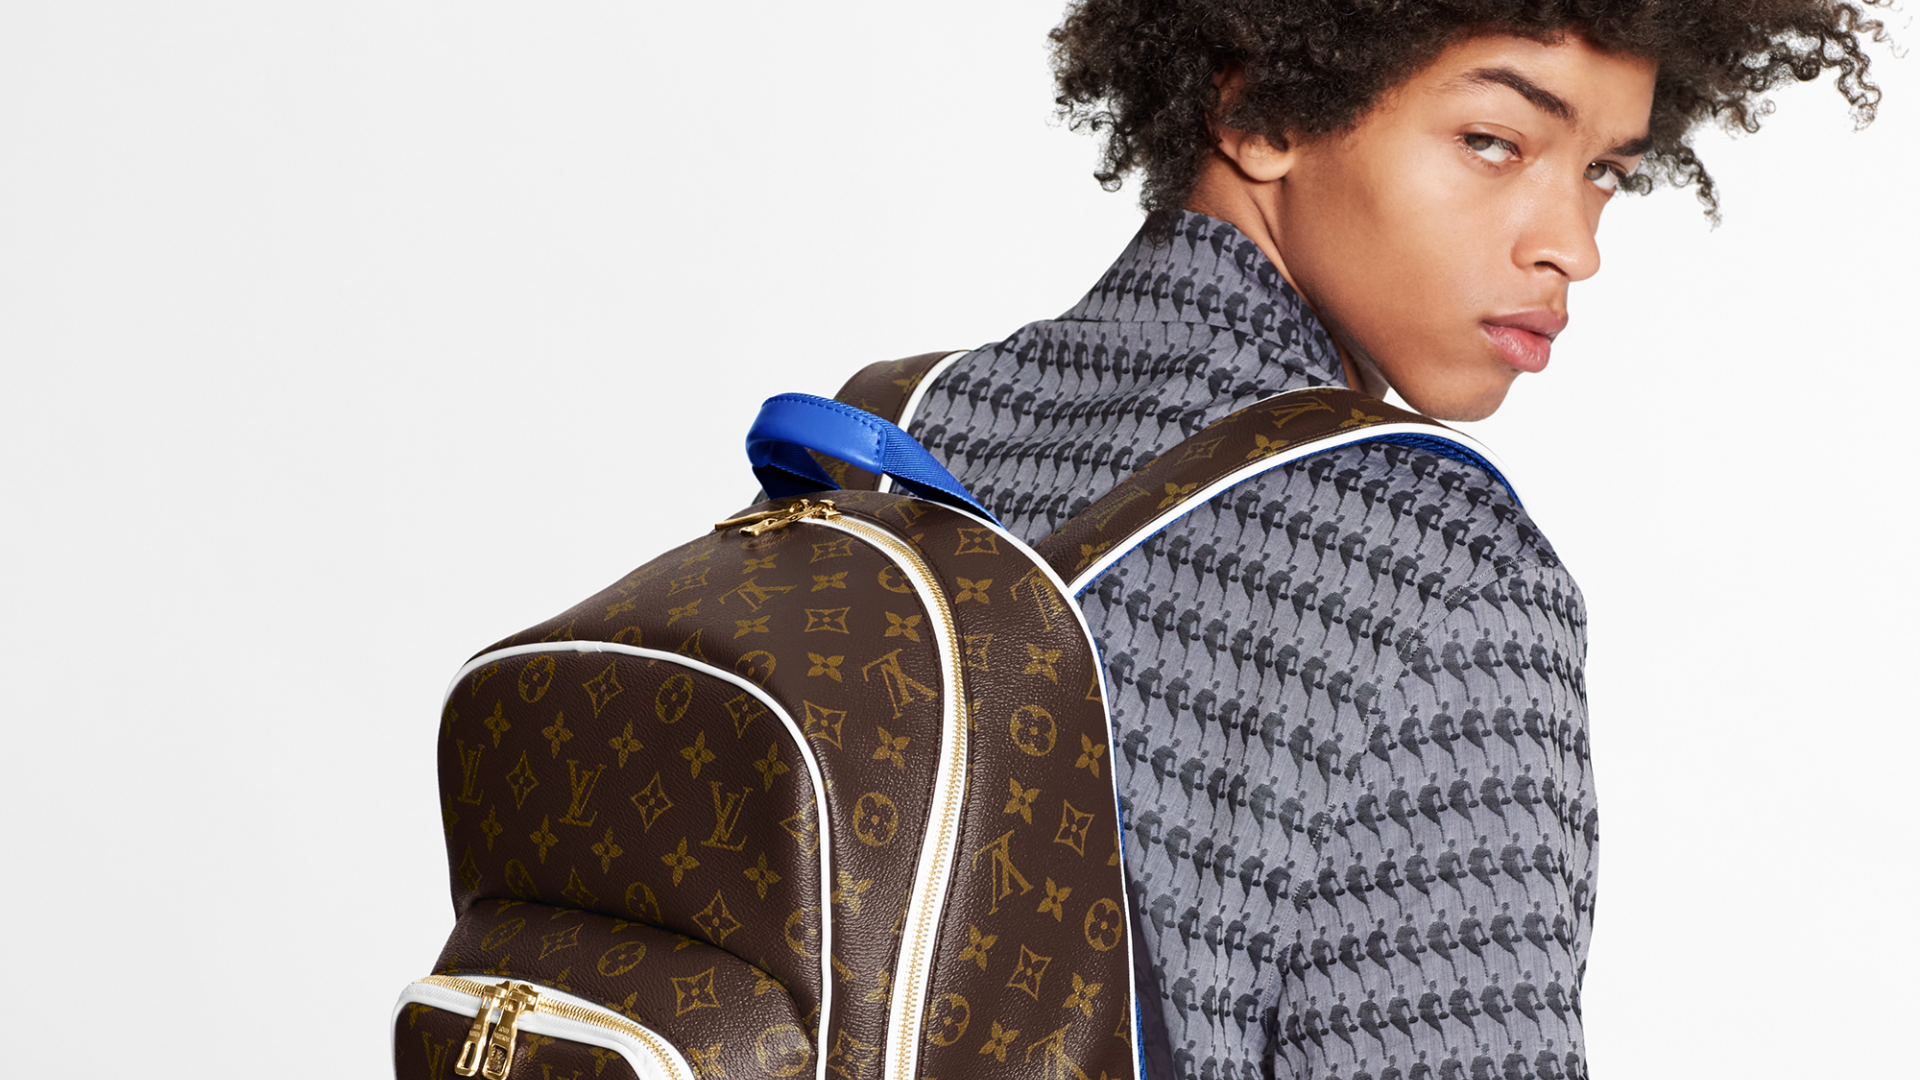 Louis Vuitton x NBA: Good Play or a Step Out of Bounds? - Unity Marketing